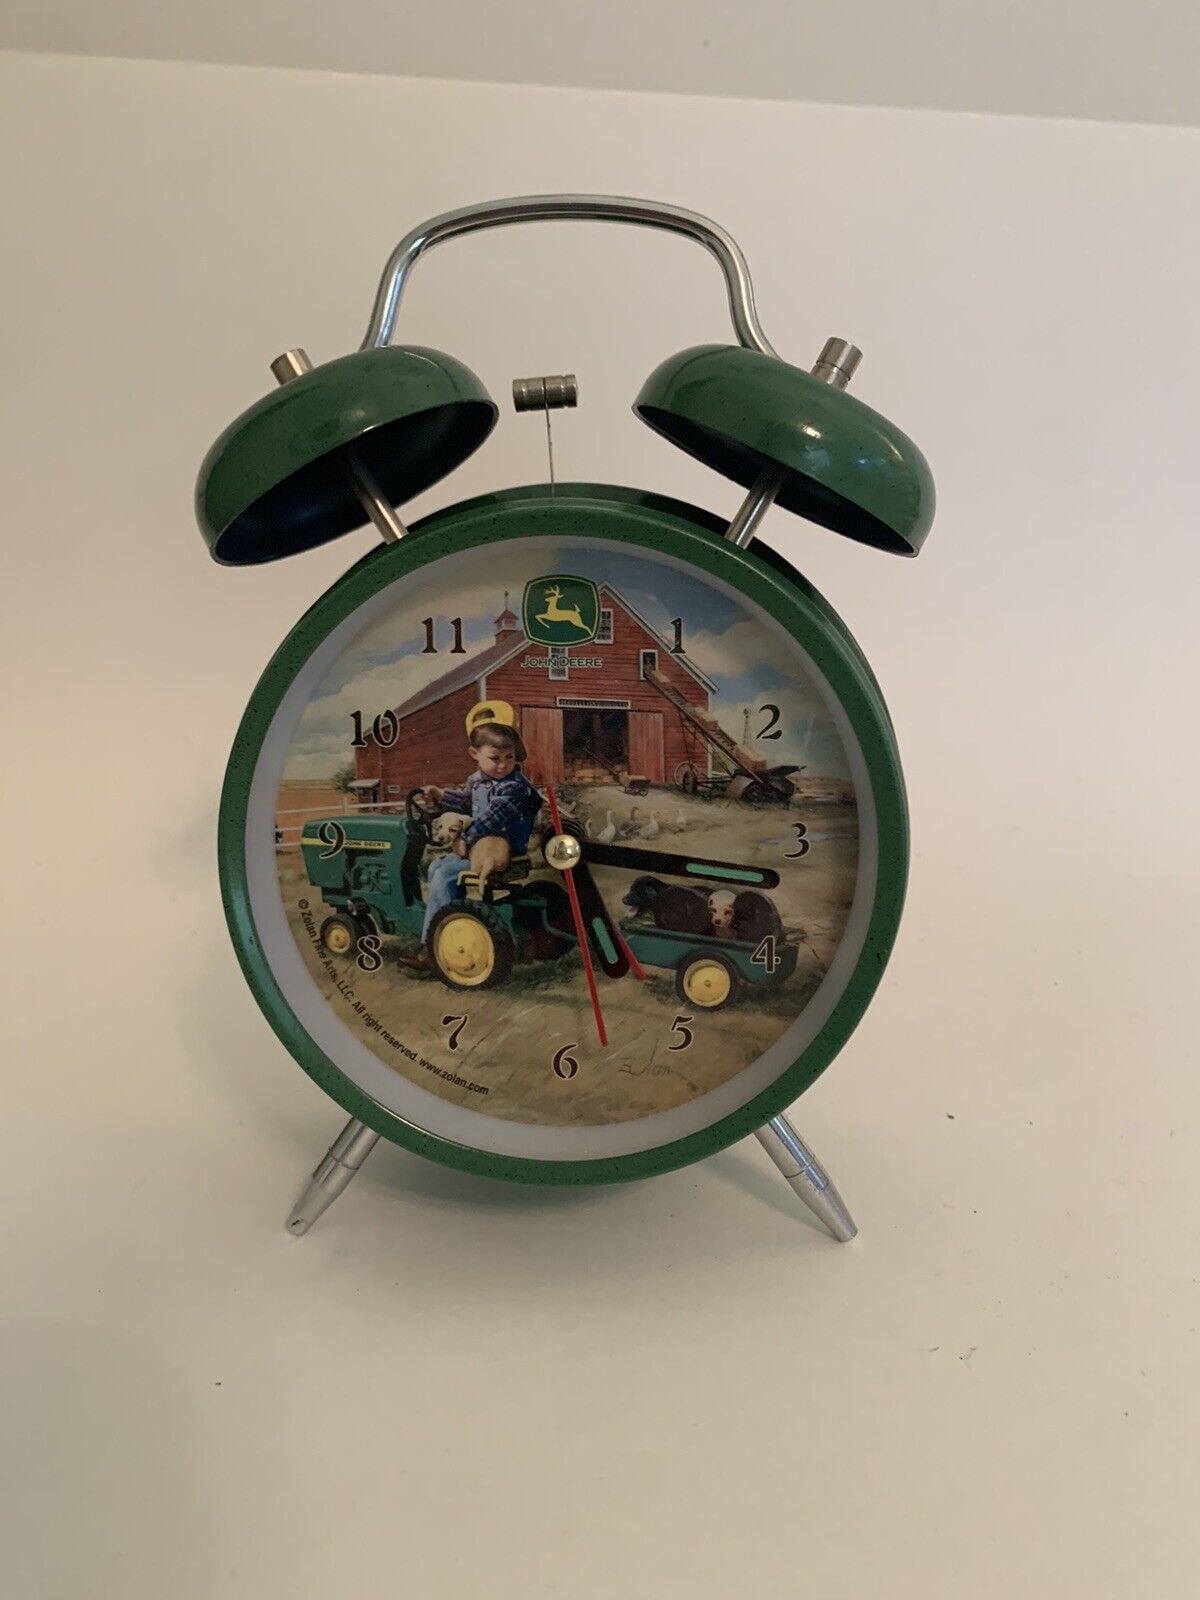 John Deere Alarm Clock, Operates With a C Battery. Keeps Good Time